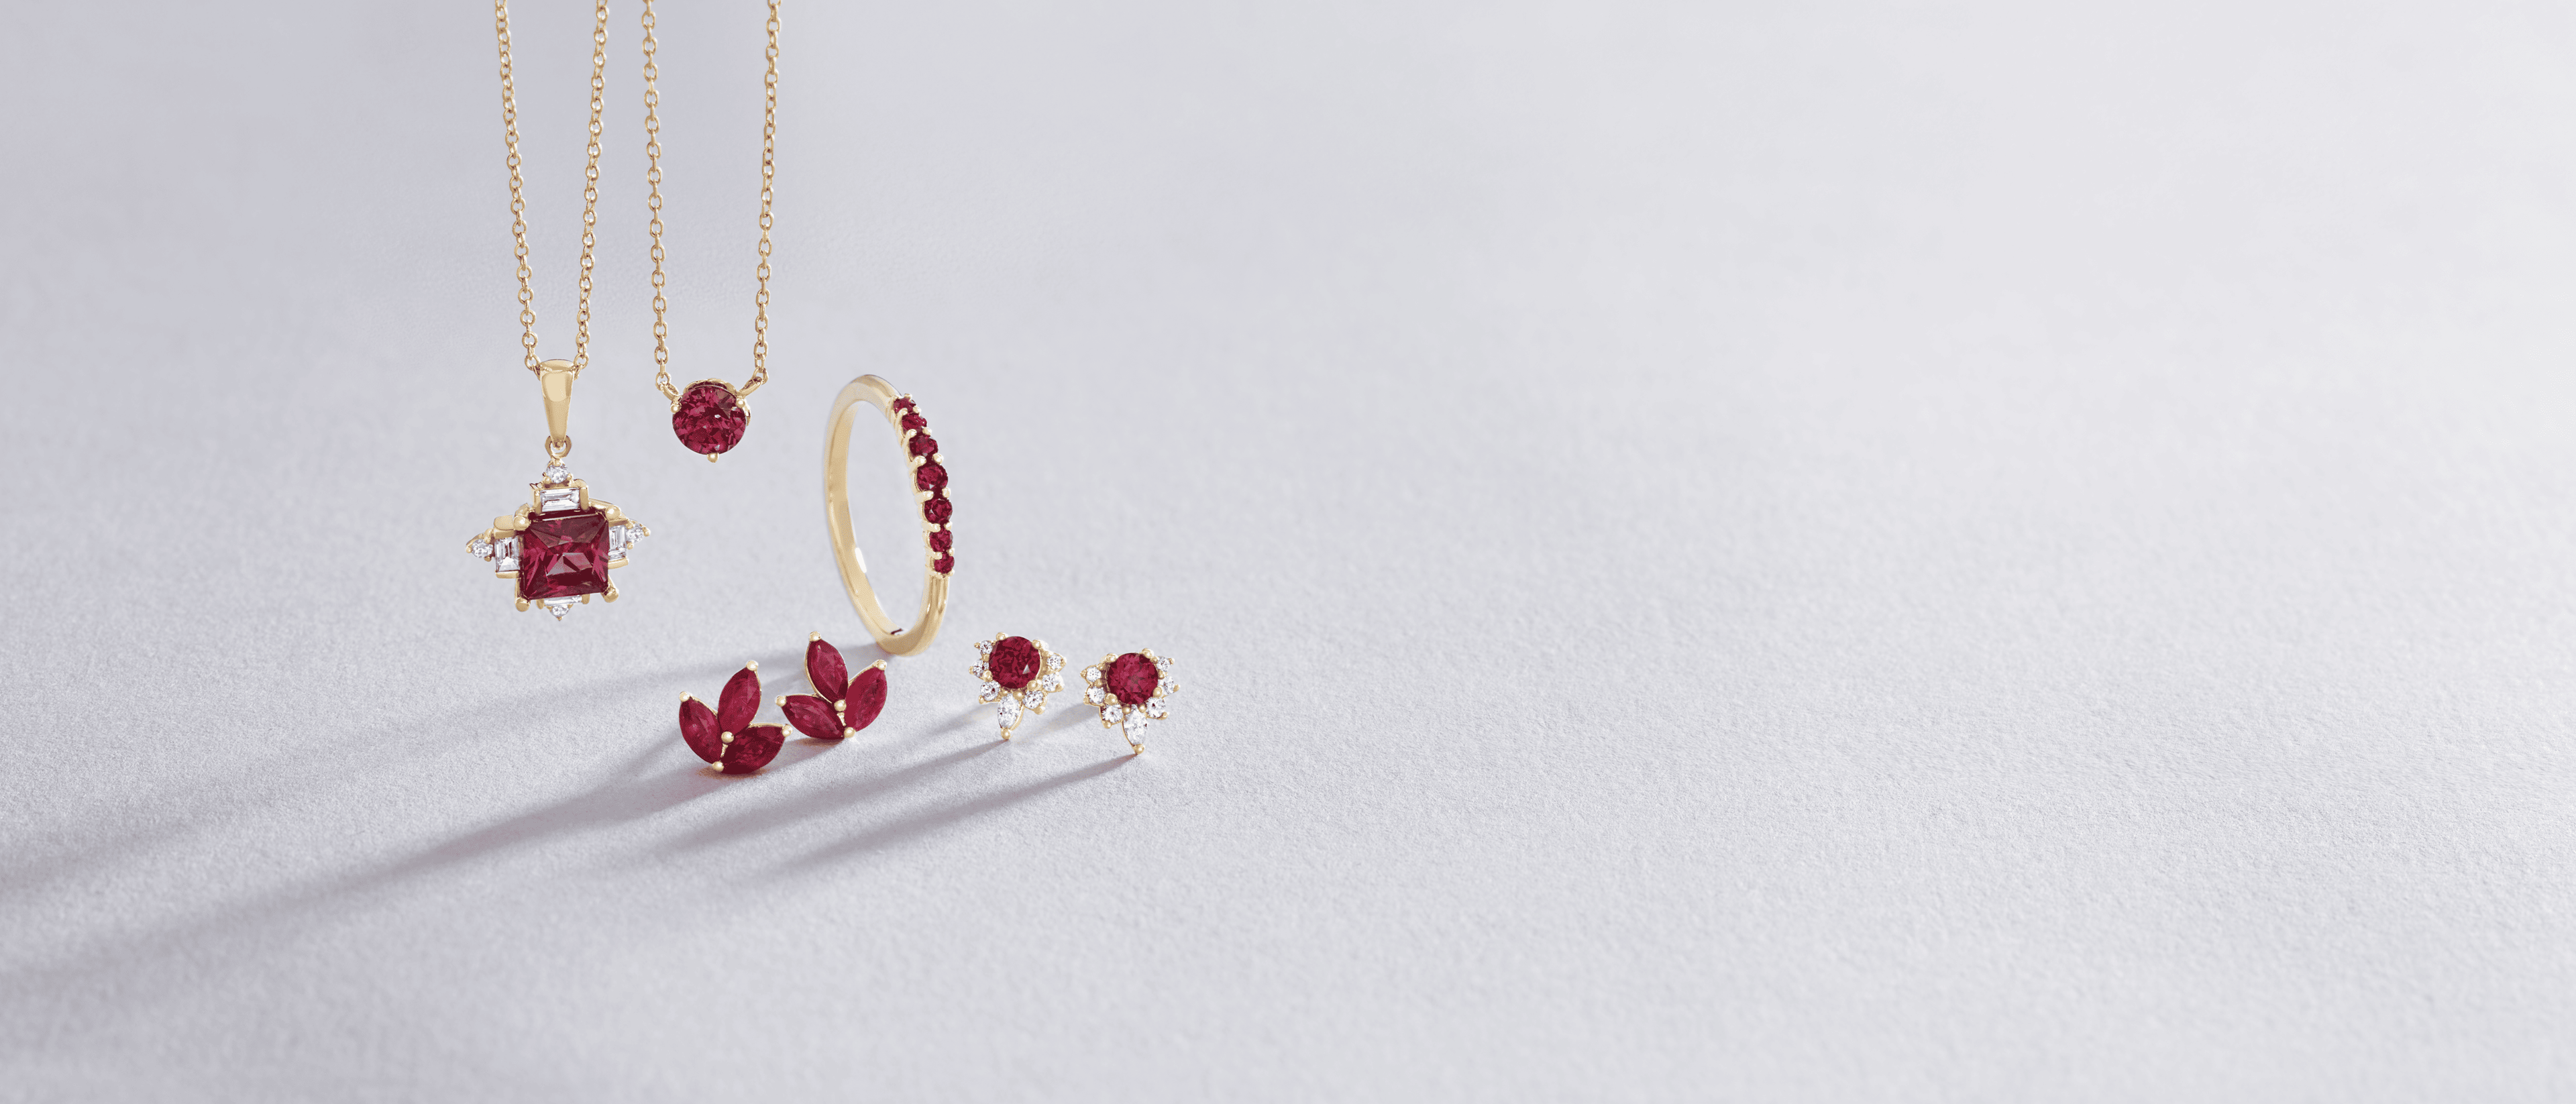 Assorted women's gold and ruby jewelry against a white background